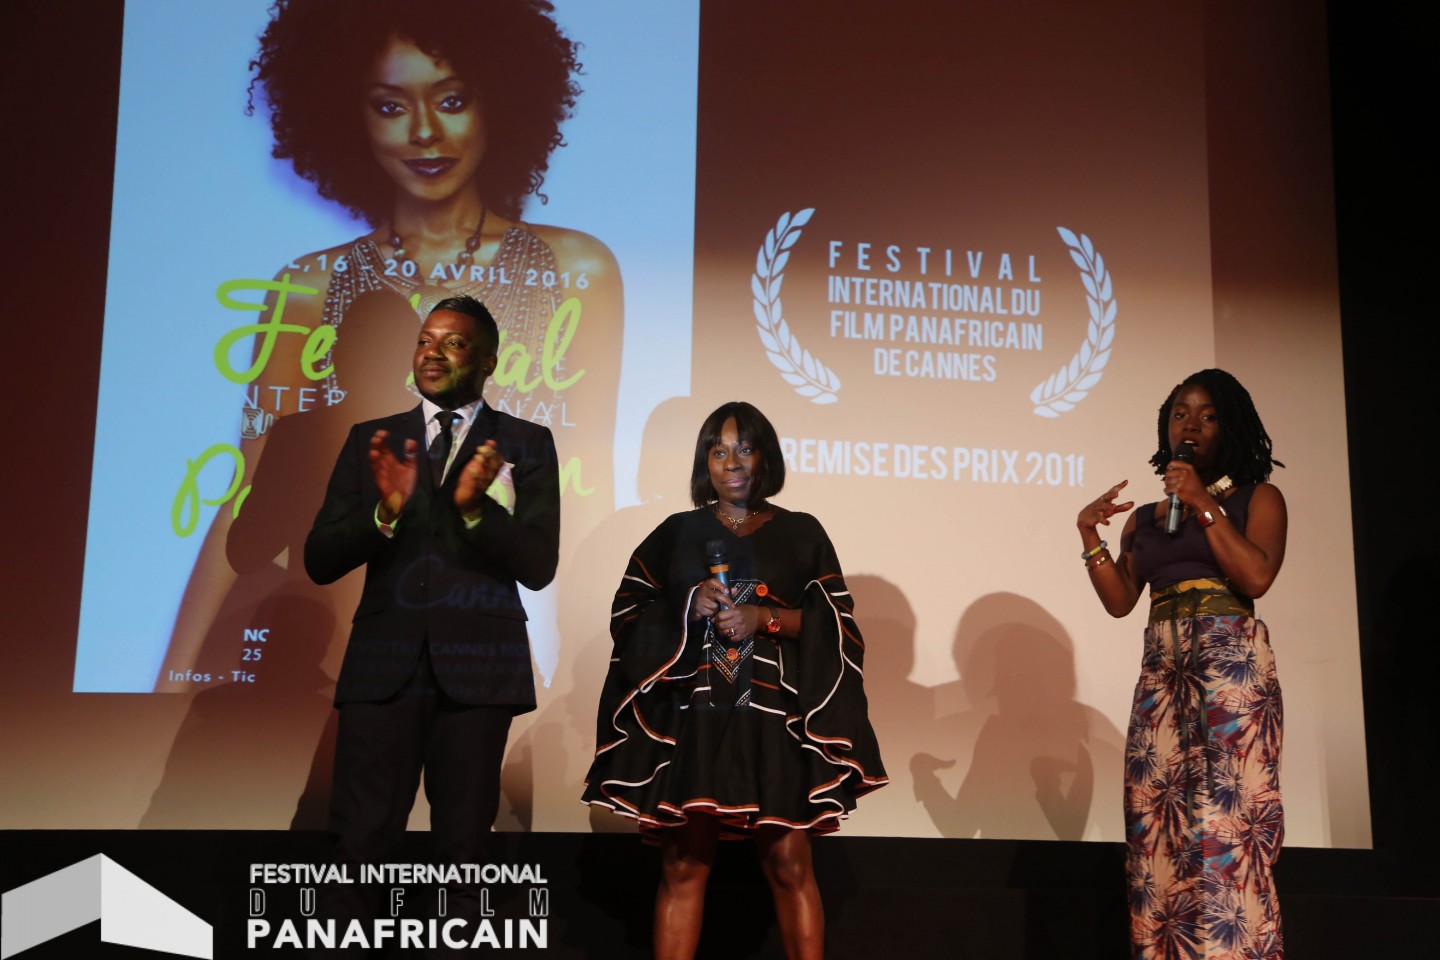 Pan-African Film festival, Cannes